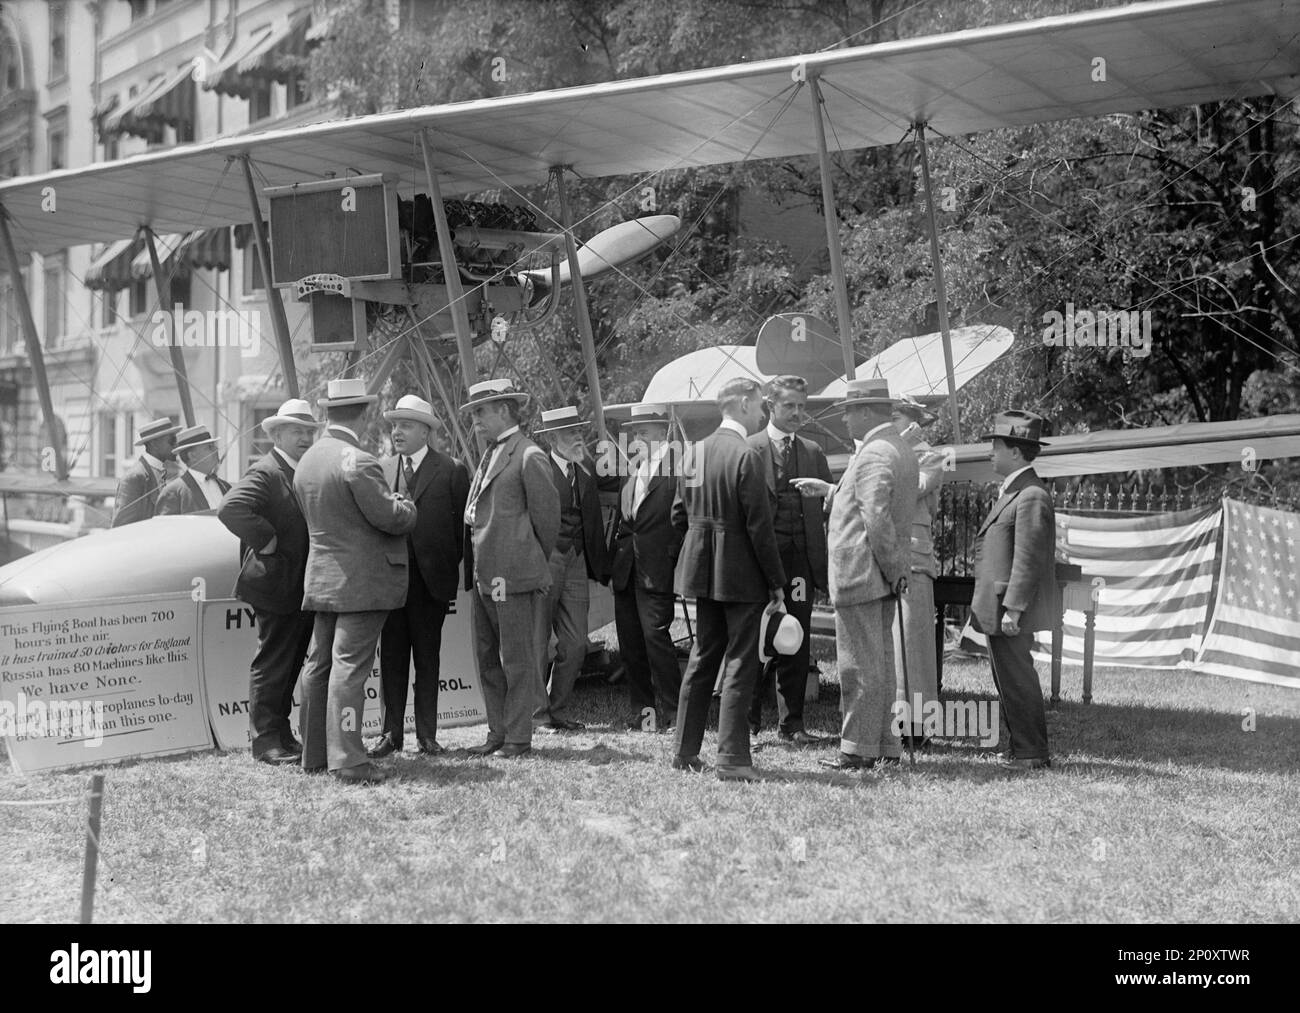 National Aero Coast Patrol Commn. - Curtiss Hydroaeroplane or Flying Boat Exhibited Near House Office Building, Rep. Kahn; Unidentified; Asst. Sec. Ingraham; Adm. [Robert] Peary; Rep. Lieb; Prof. Frankenfield; Bowman; Taylor; Newton; Smith. Unidentified Man, Back Turned Right of Kahn, 1917. Stock Photo